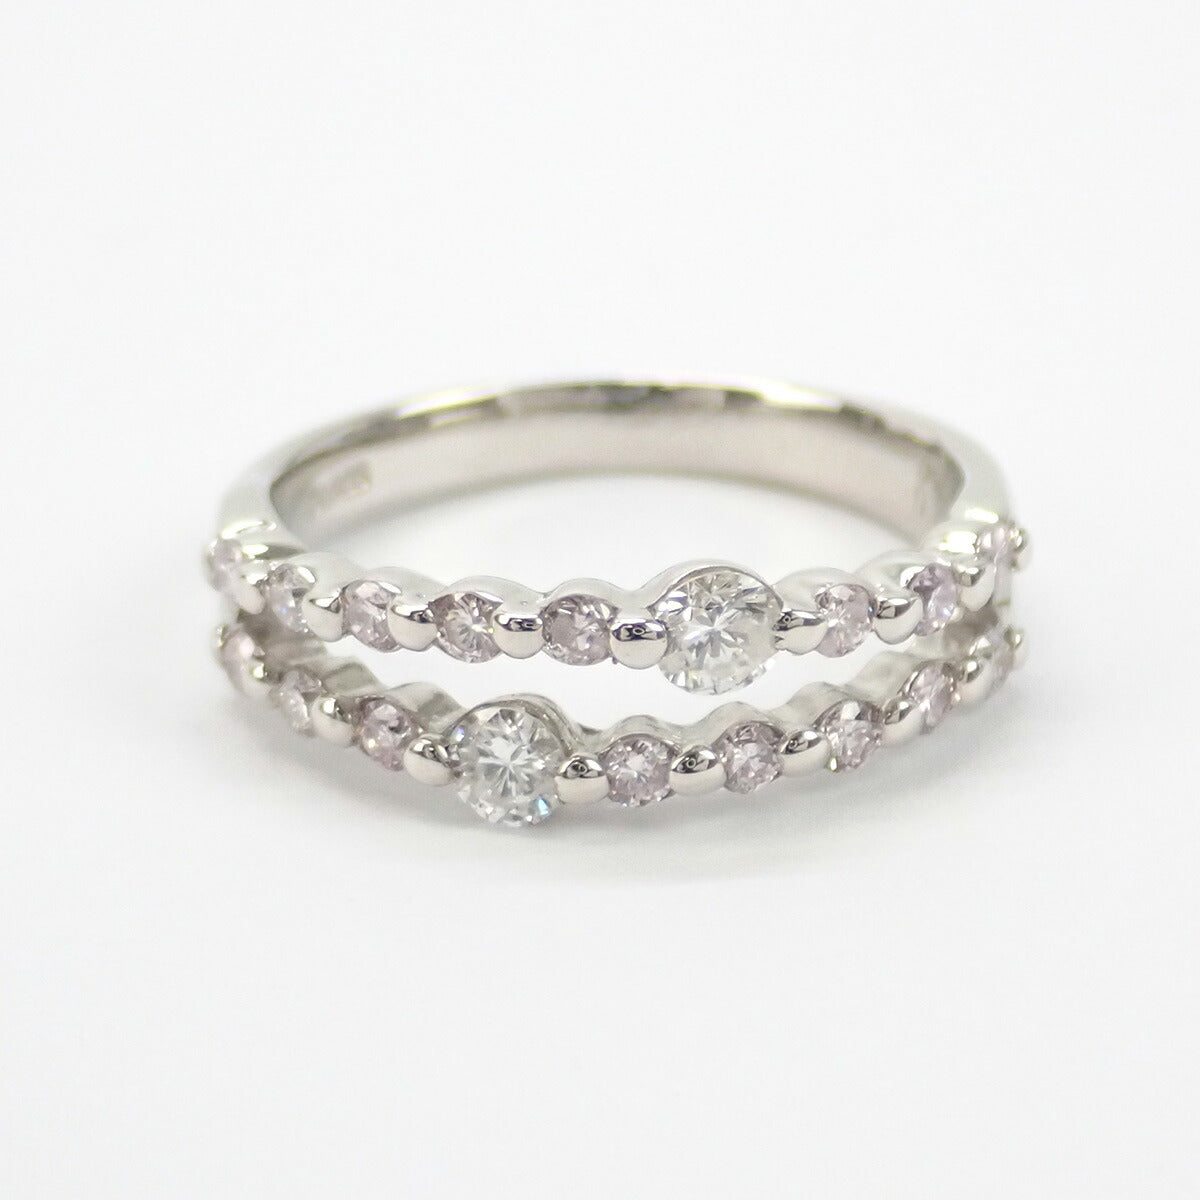 [LuxUness]  Platinum 900 Diamond Ring, Diamonds 0.36/0.20ct, Size 11, Silver Finish, Ladies (Pre-owned) in Excellent condition